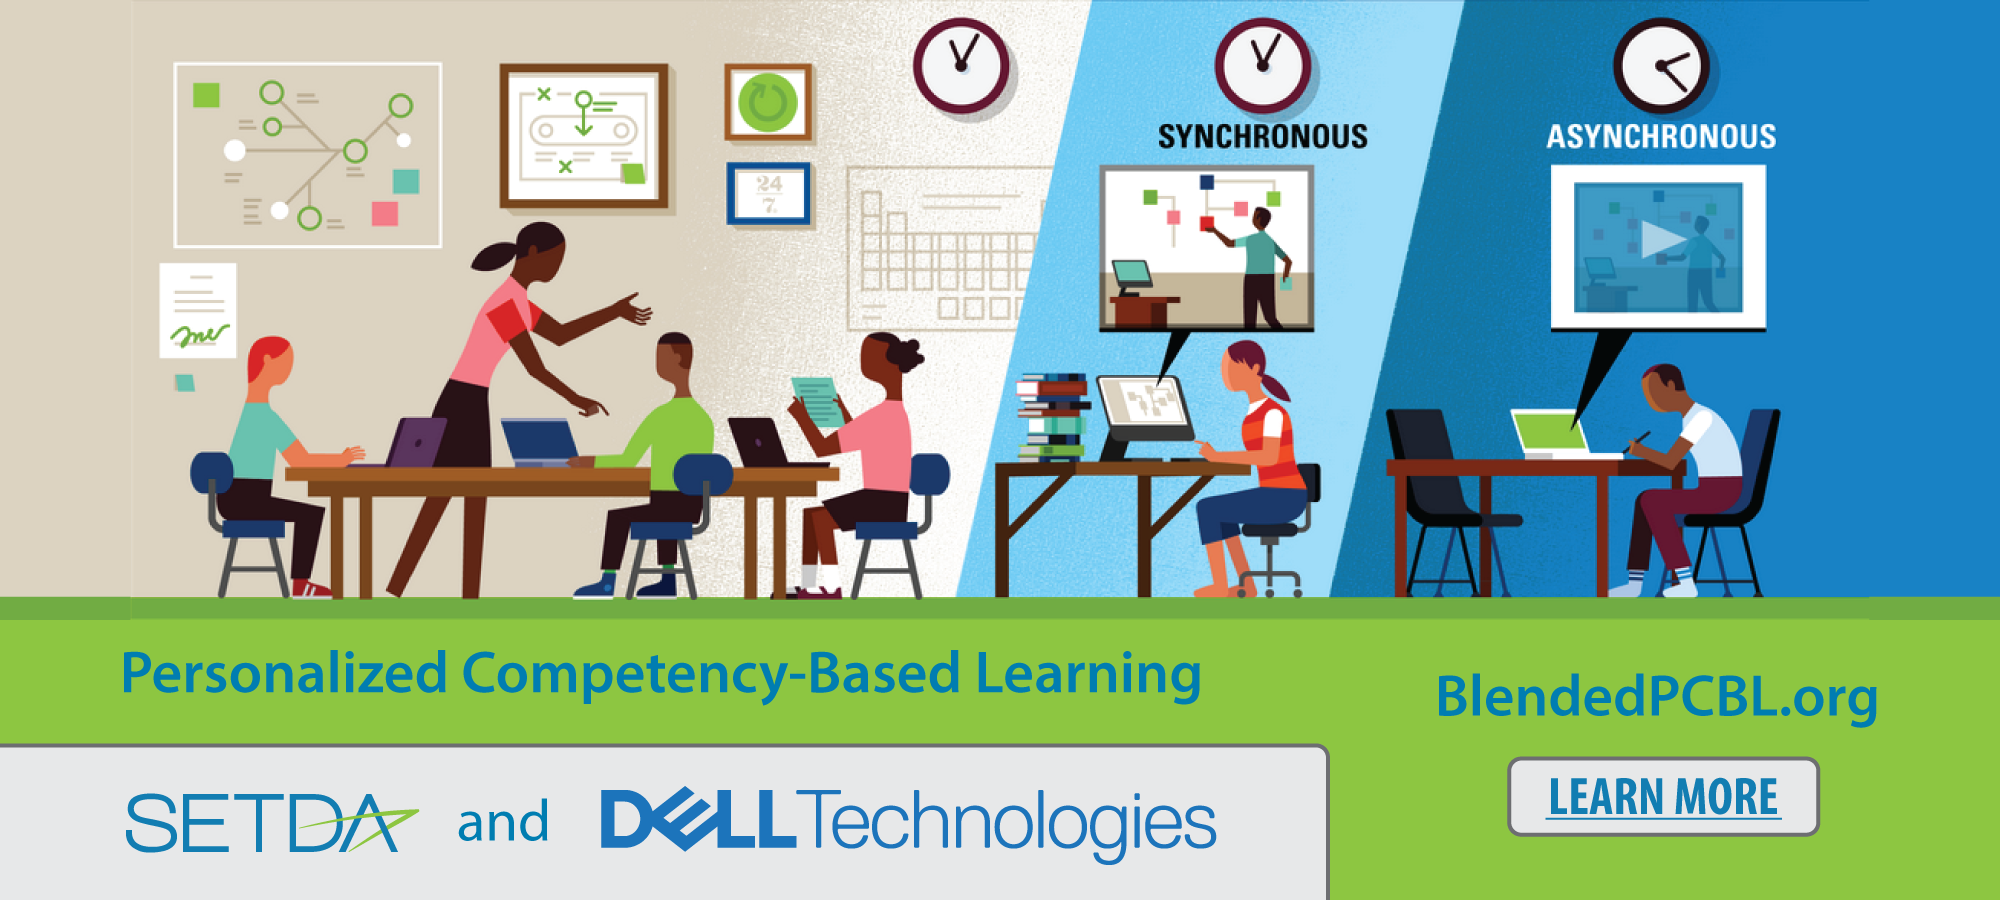 Personalized Competency-Based Learning